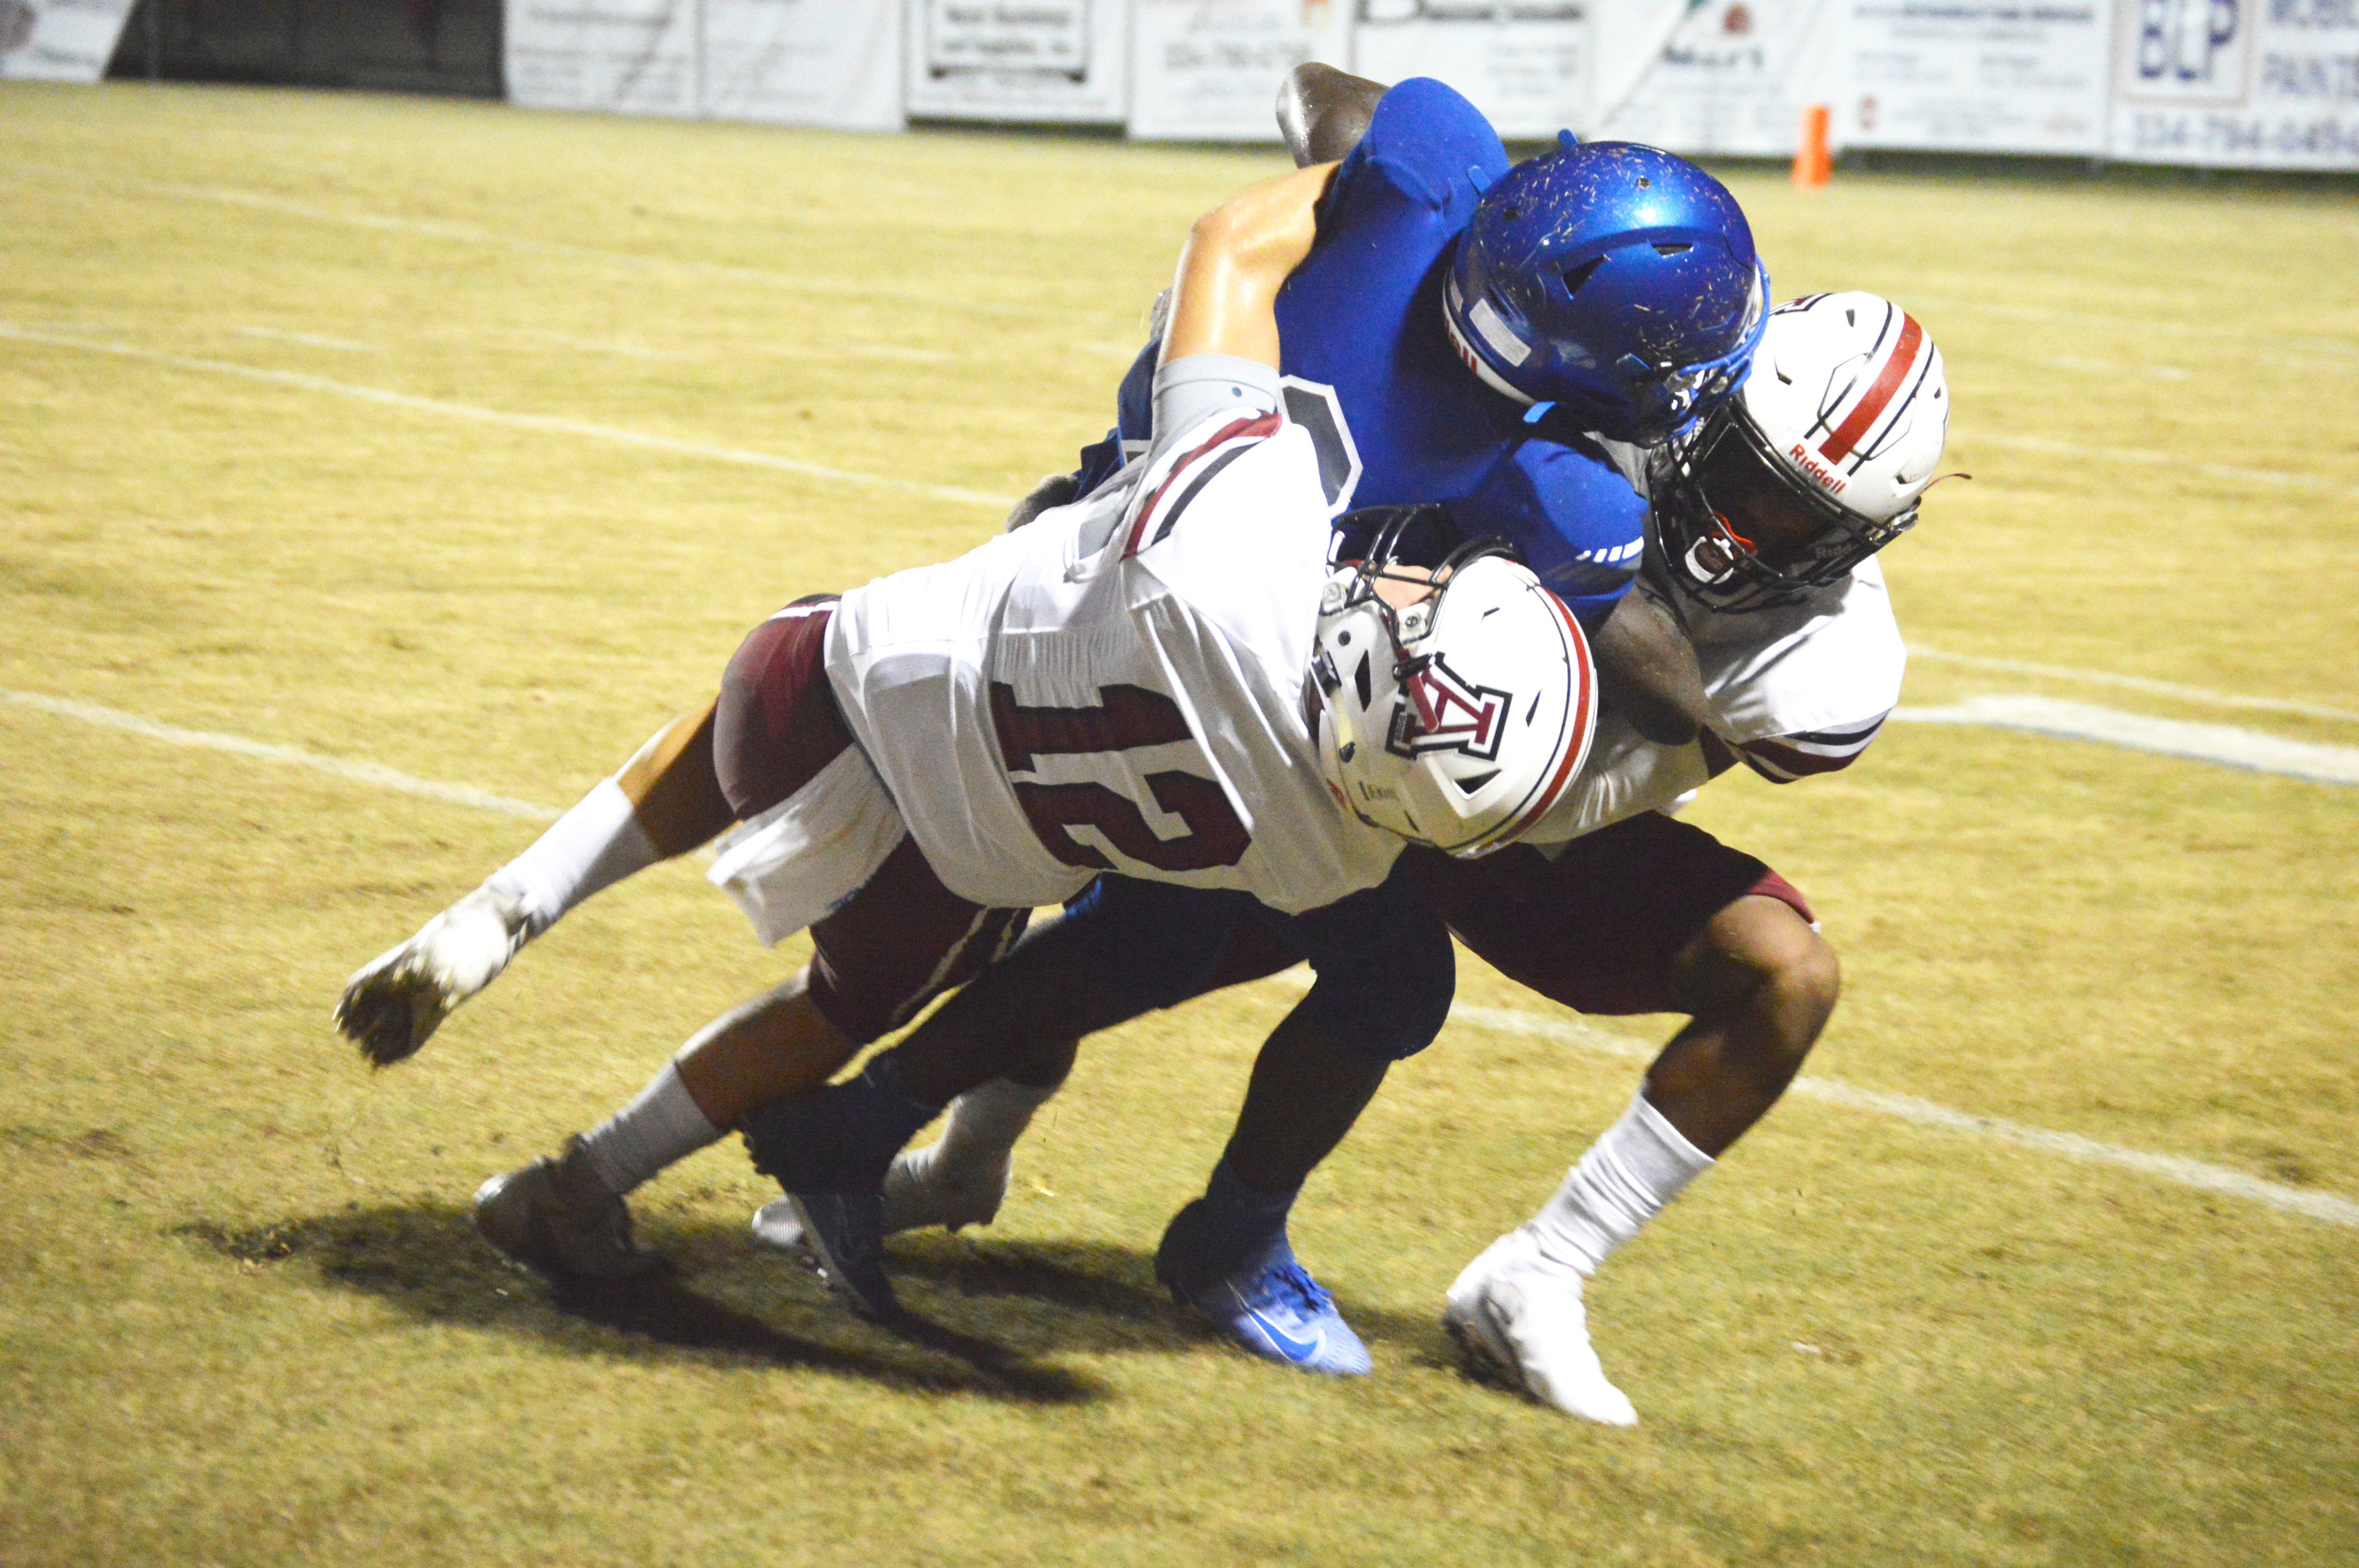 FIRST WIN, REGION WIN: Andalusia gets the ‘W’ against 5A Rehobeth 38-22